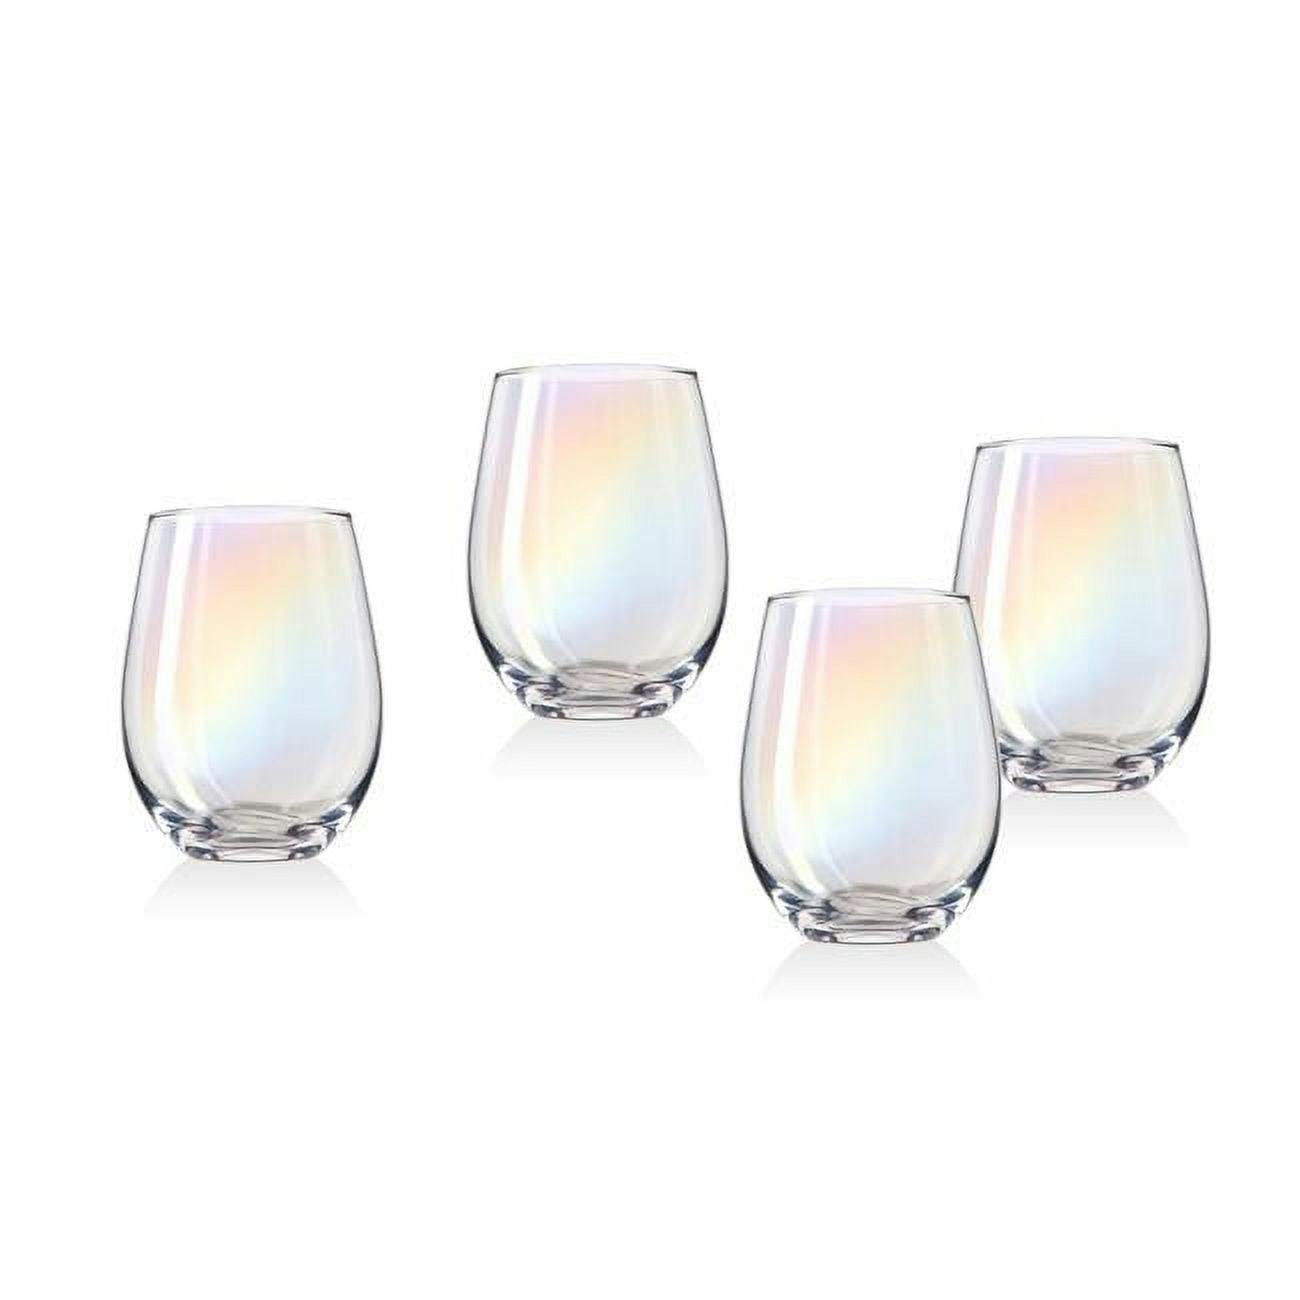 Elegant Iridescent 19 oz. Stemless Wine Glass Set for Sophisticated Sipping